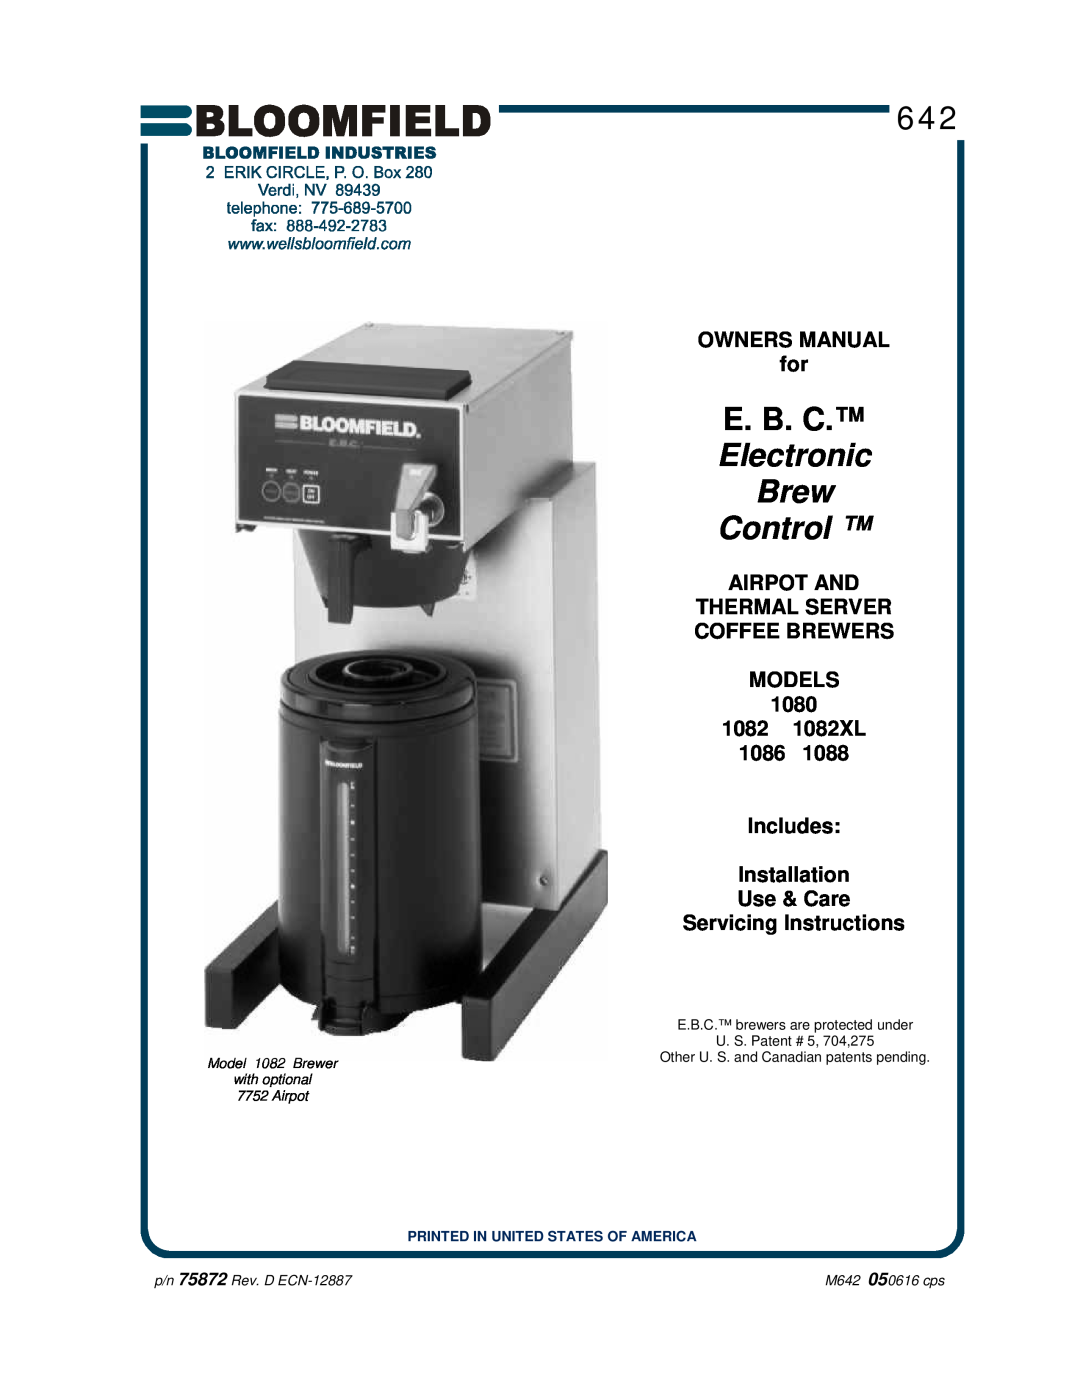 Bloomfield owner manual OWNERS MANUAL for, AIRPOT AND THERMAL SERVER COFFEE BREWERS MODELS 1080 1082 1082XL, E. B. C 